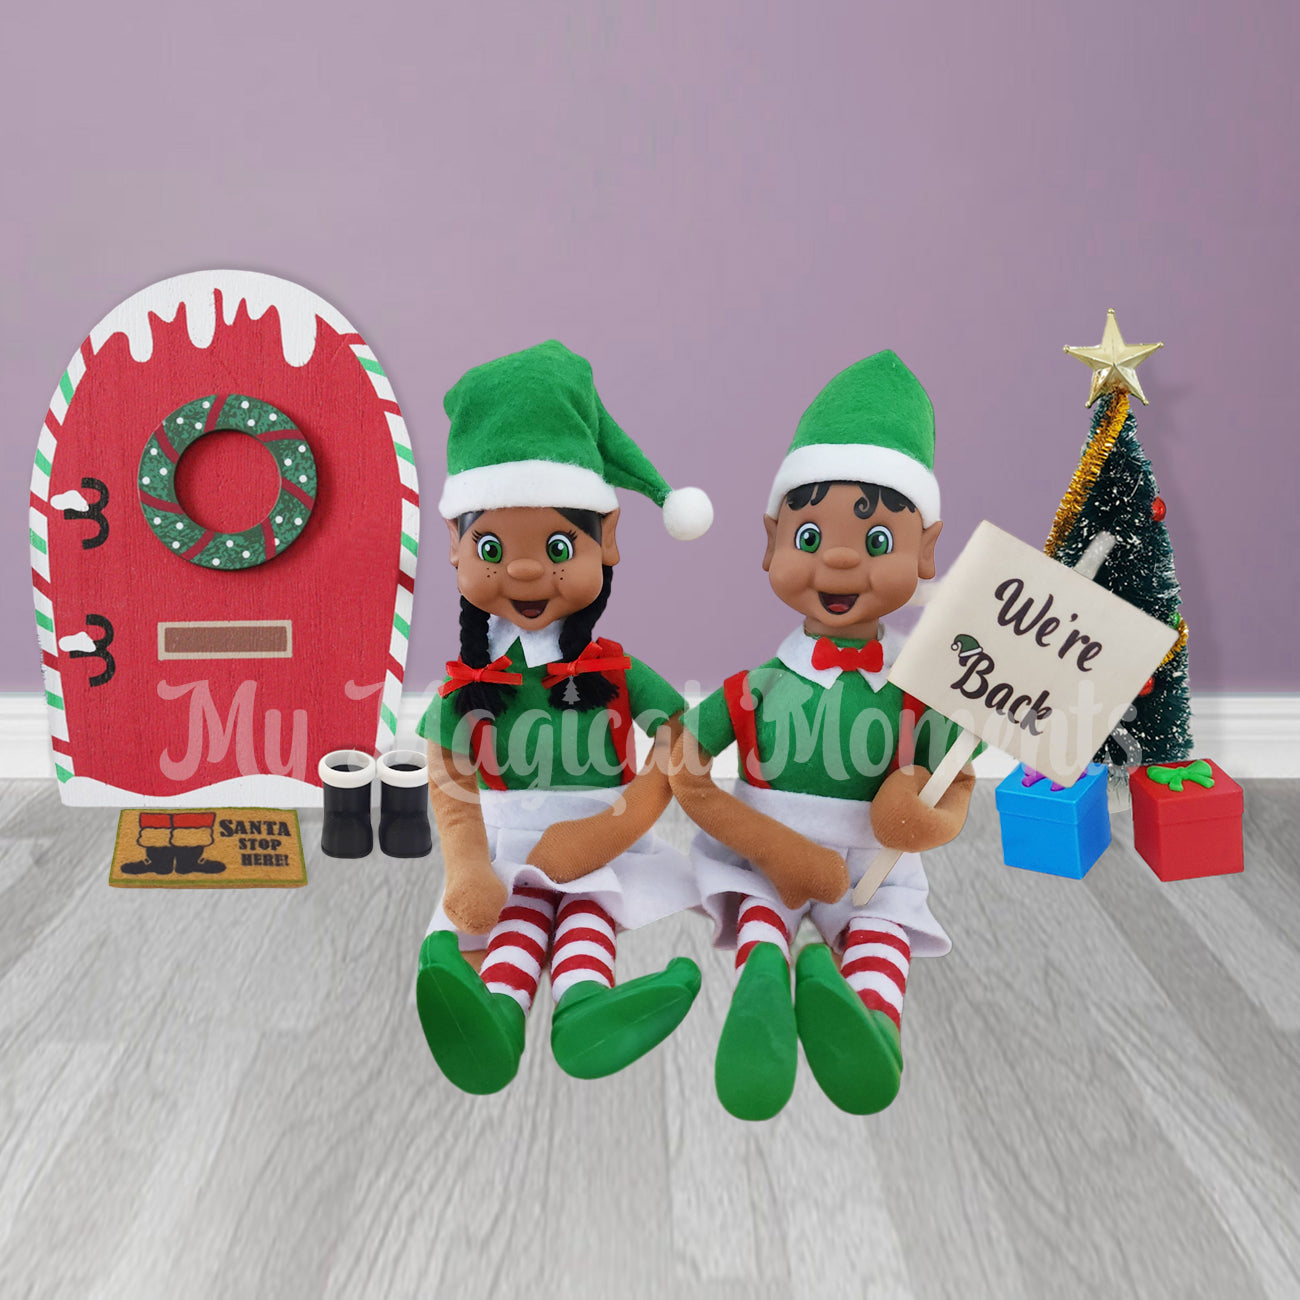 Black hair elves sitting with their elf door and holding were back sign